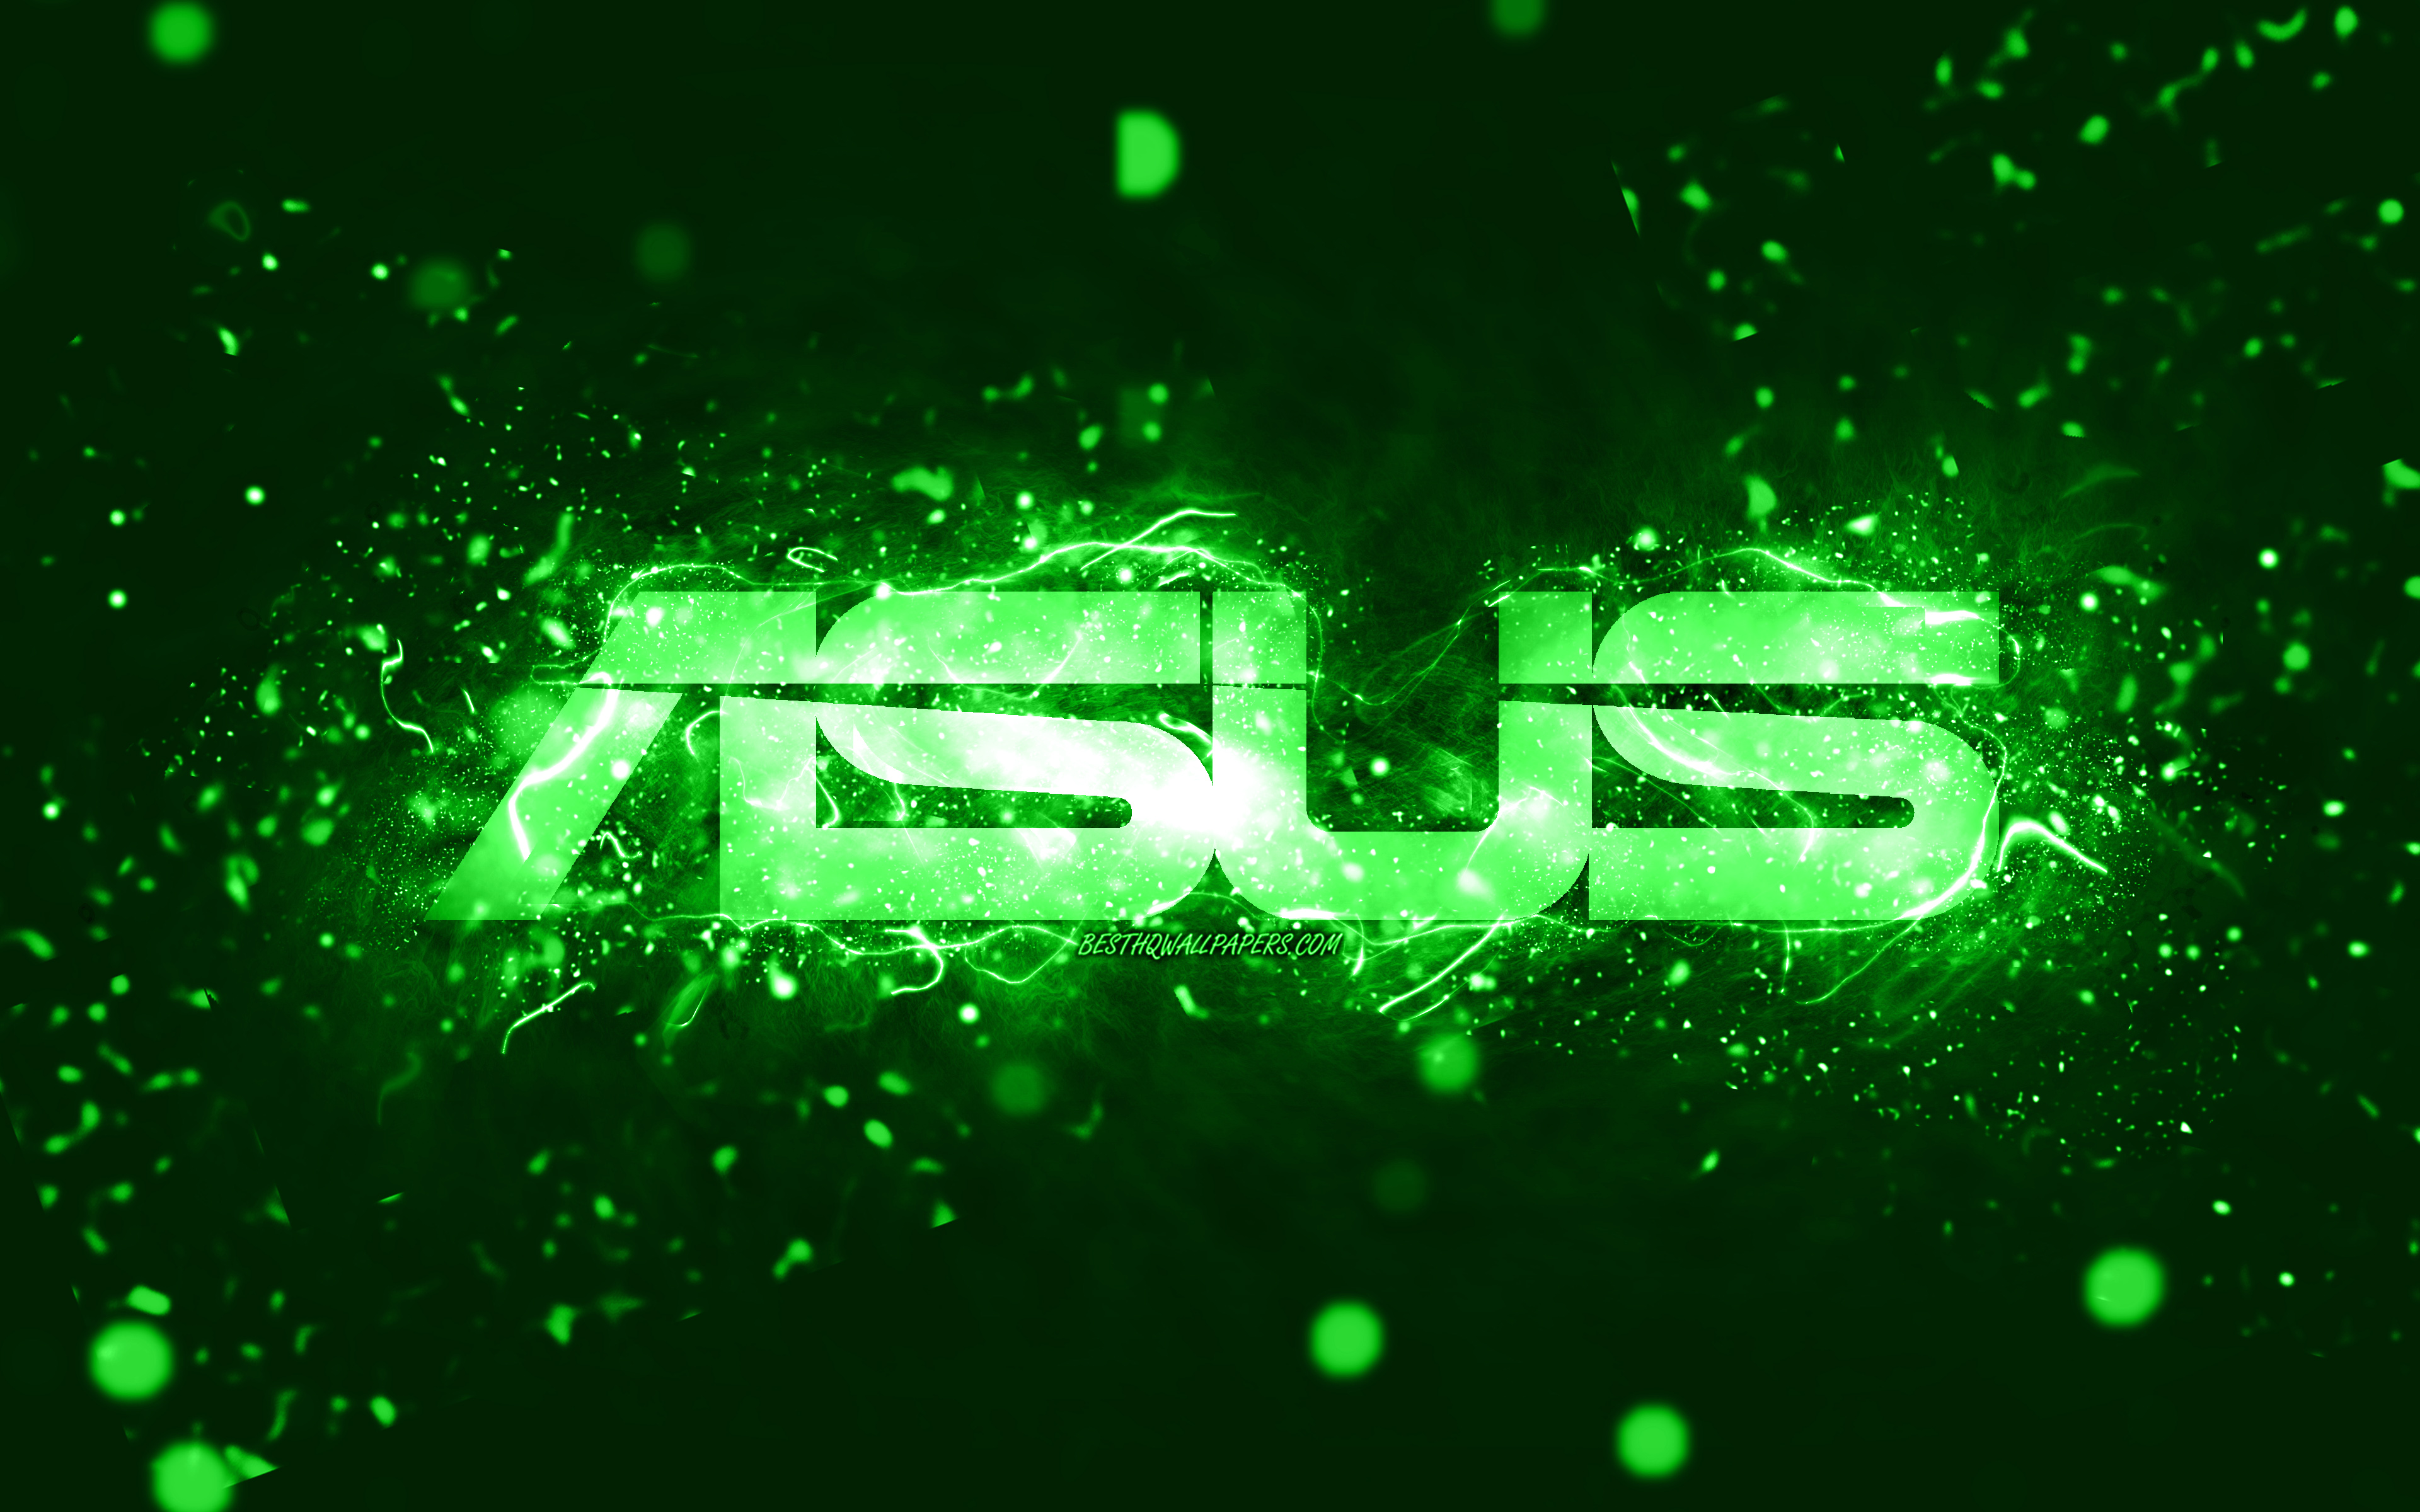 Download wallpaper Asus green logo, 4k, green neon lights, creative, green abstract background, Asus logo, brands, Asus for desktop with resolution 3840x2400. High Quality HD picture wallpaper